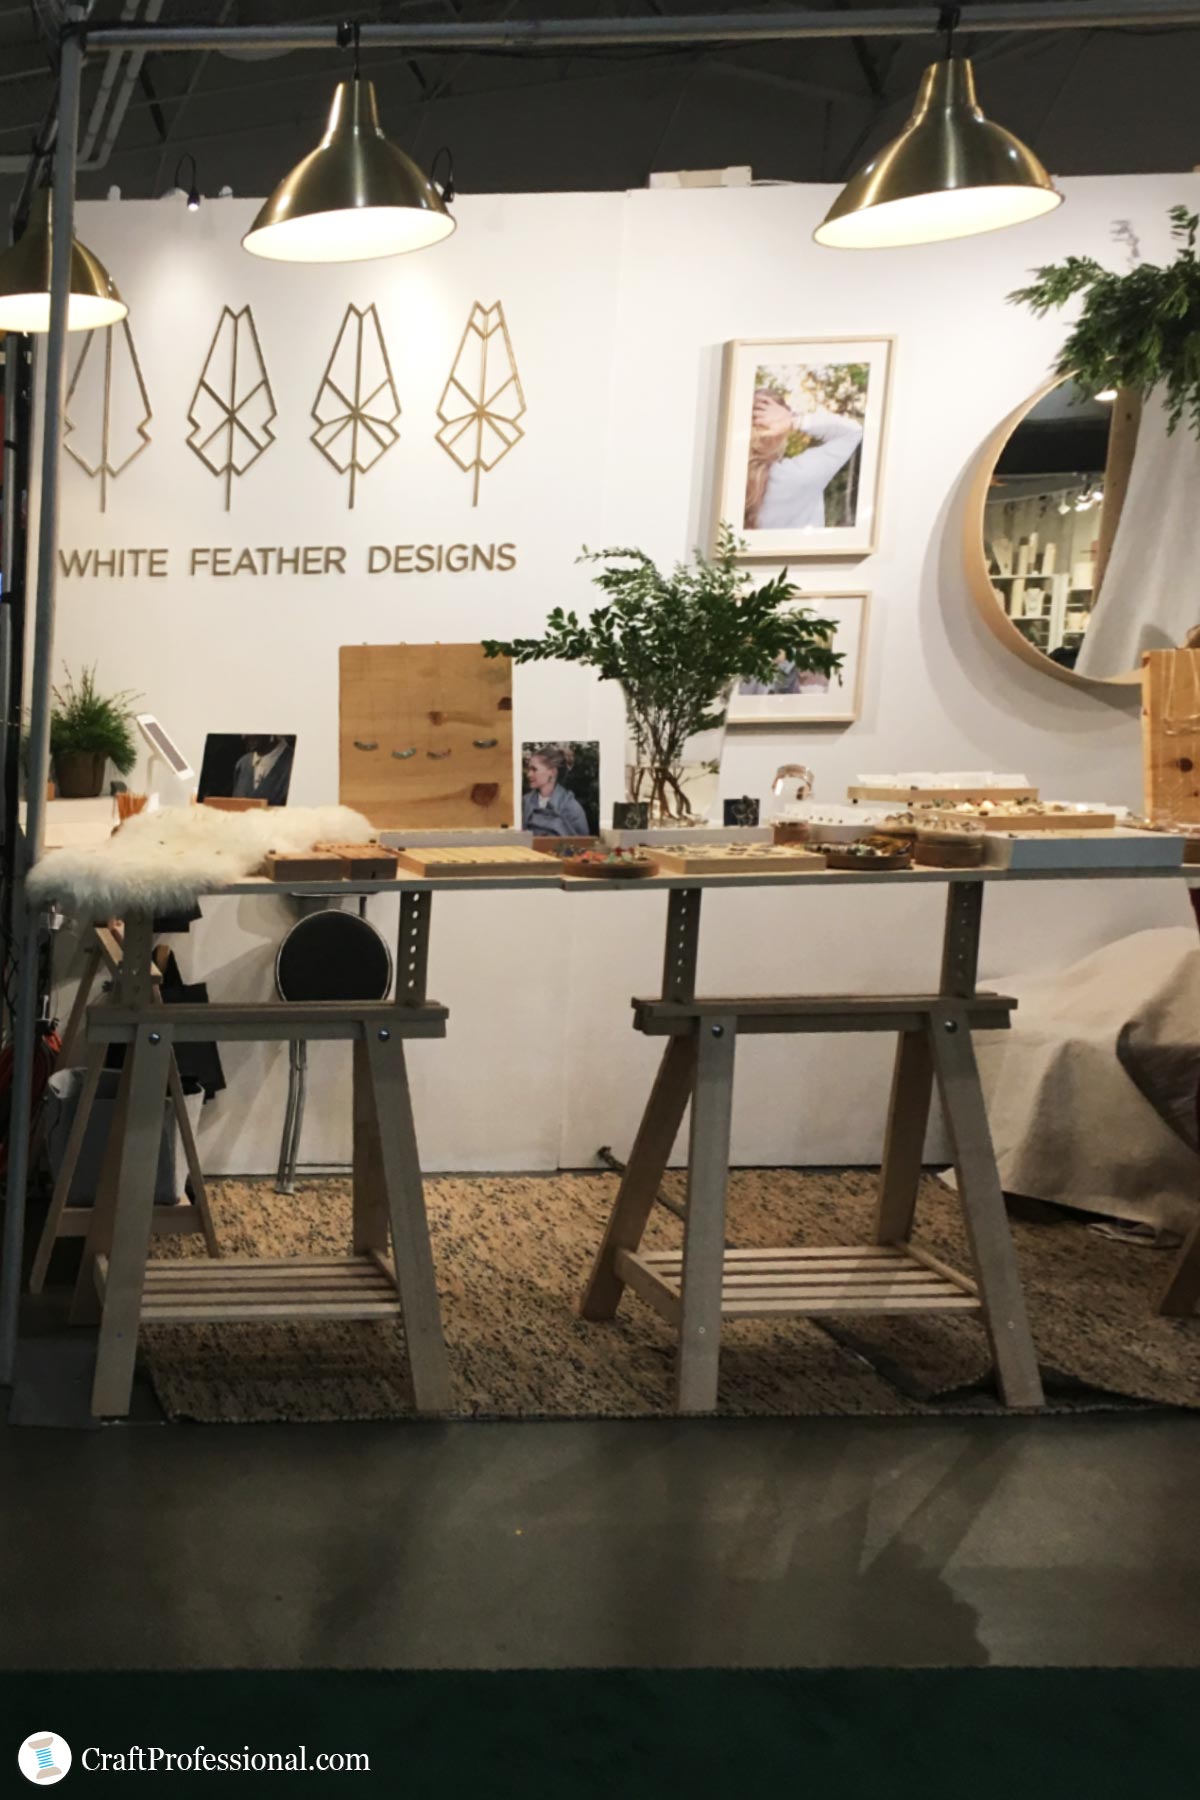 DIY Folding Craft Tables Tutorial for Displays at Shows